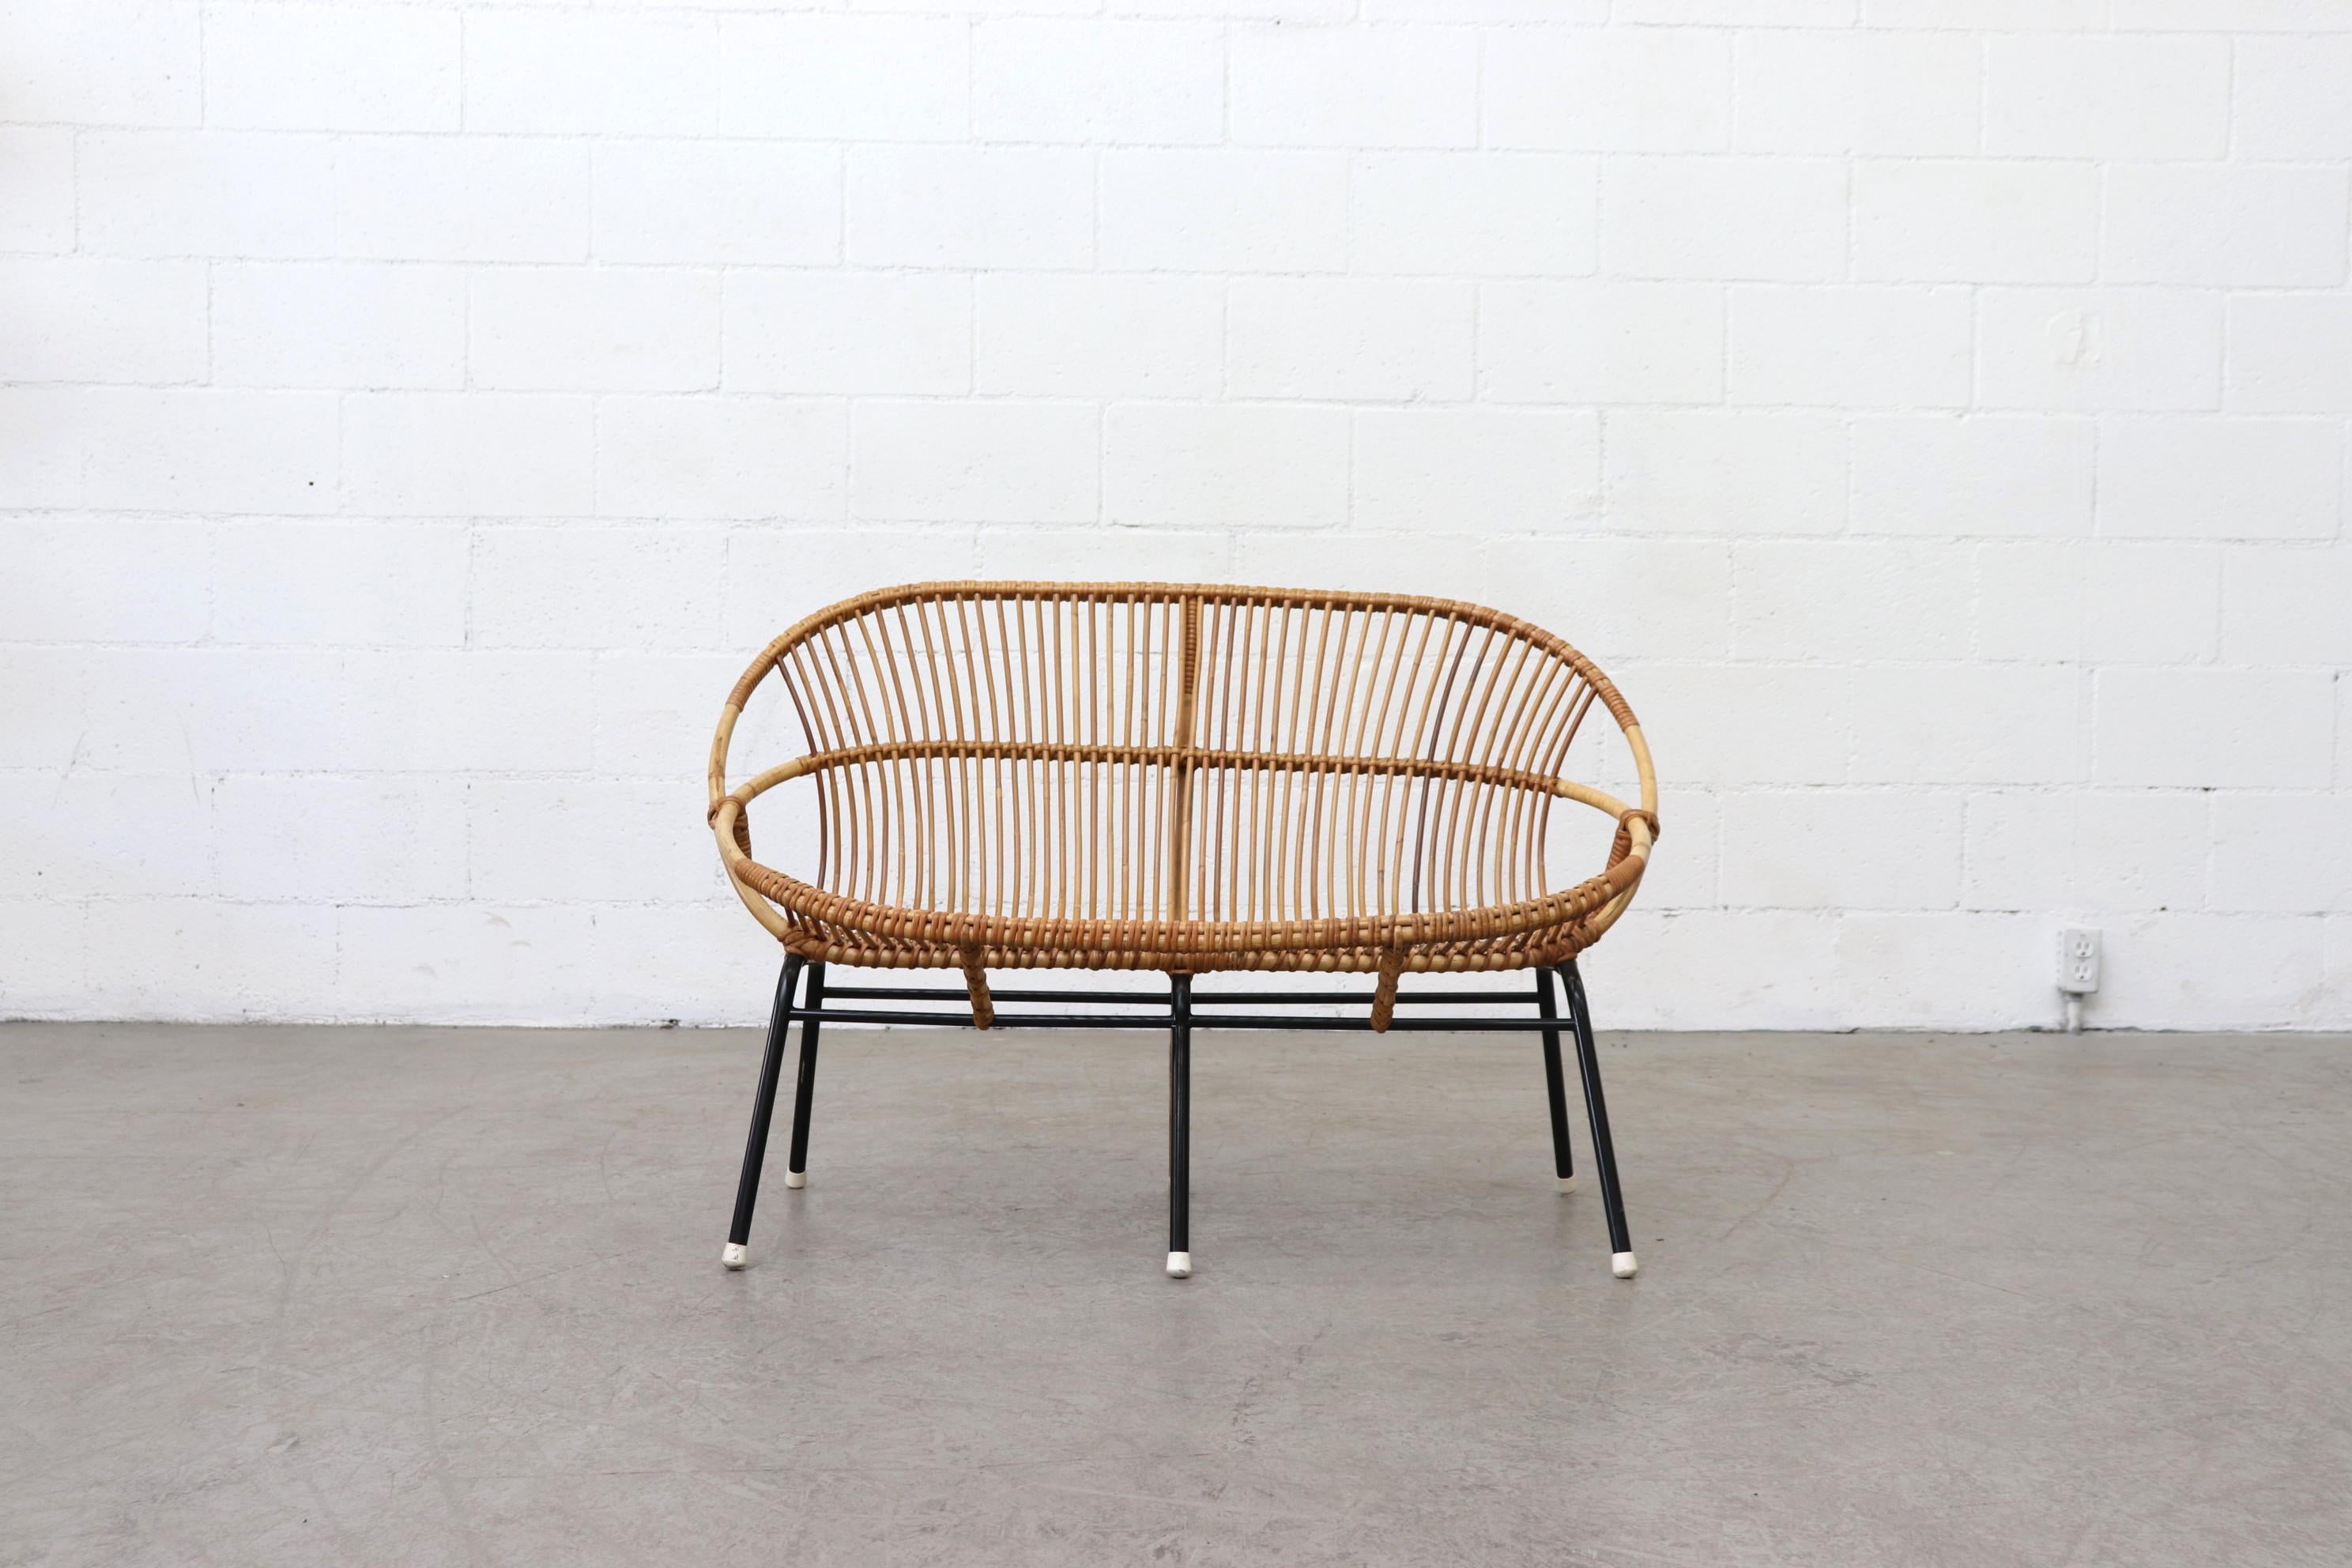 Mid-Century Bamboo Love Seat with Black Enameled Metal Frame and White Rubber Feet. In Original Condition with Some Signs of Wear Consistent with Age and Use. Other Matching Chairs Available and Listed Separately.